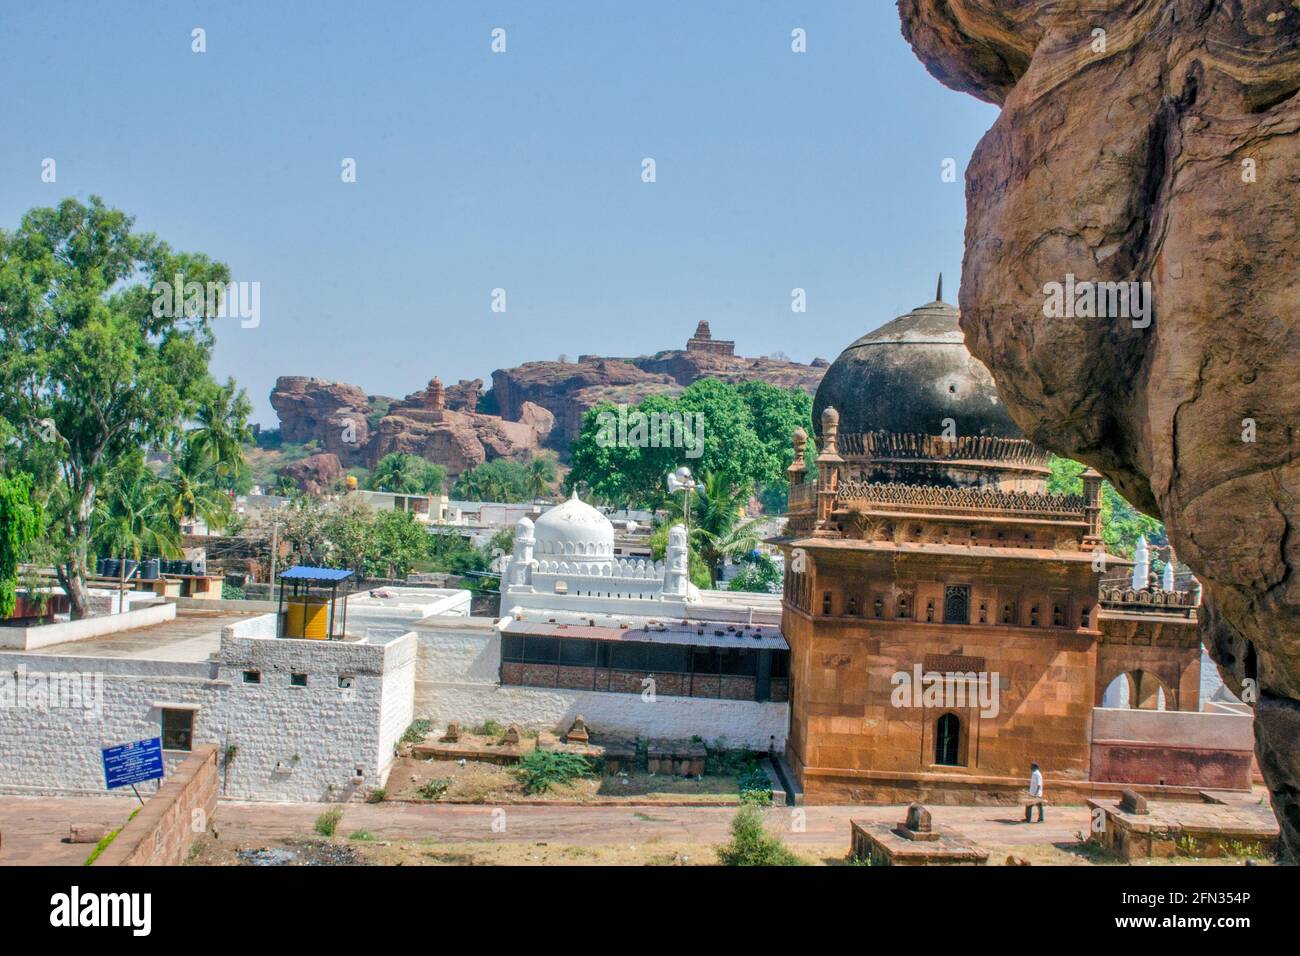 View of the Badami City from the top of the Badami Cave Temple. The same frame in the picture shows the temple on the hill and the mosque below. Stock Photo